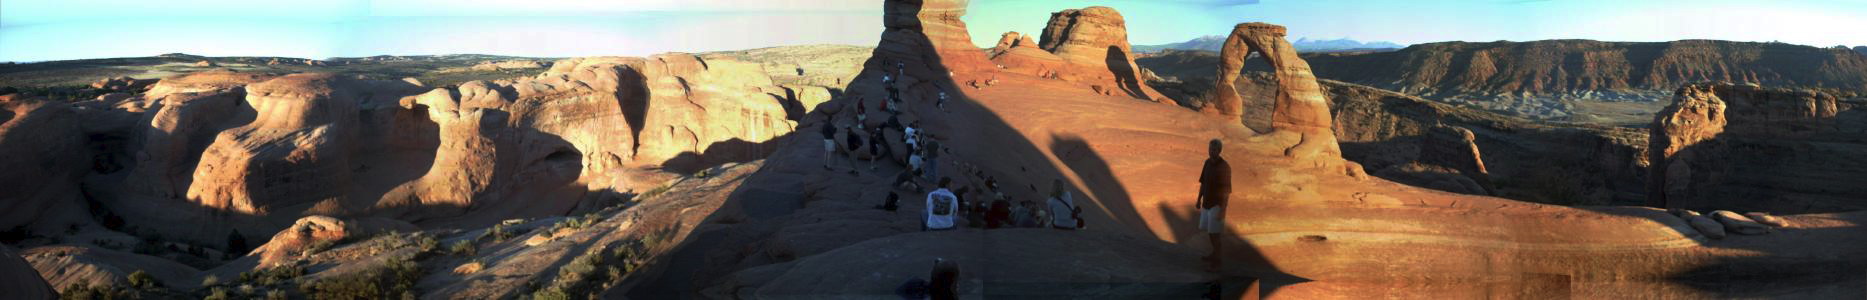 PAN Delicate Arch 3